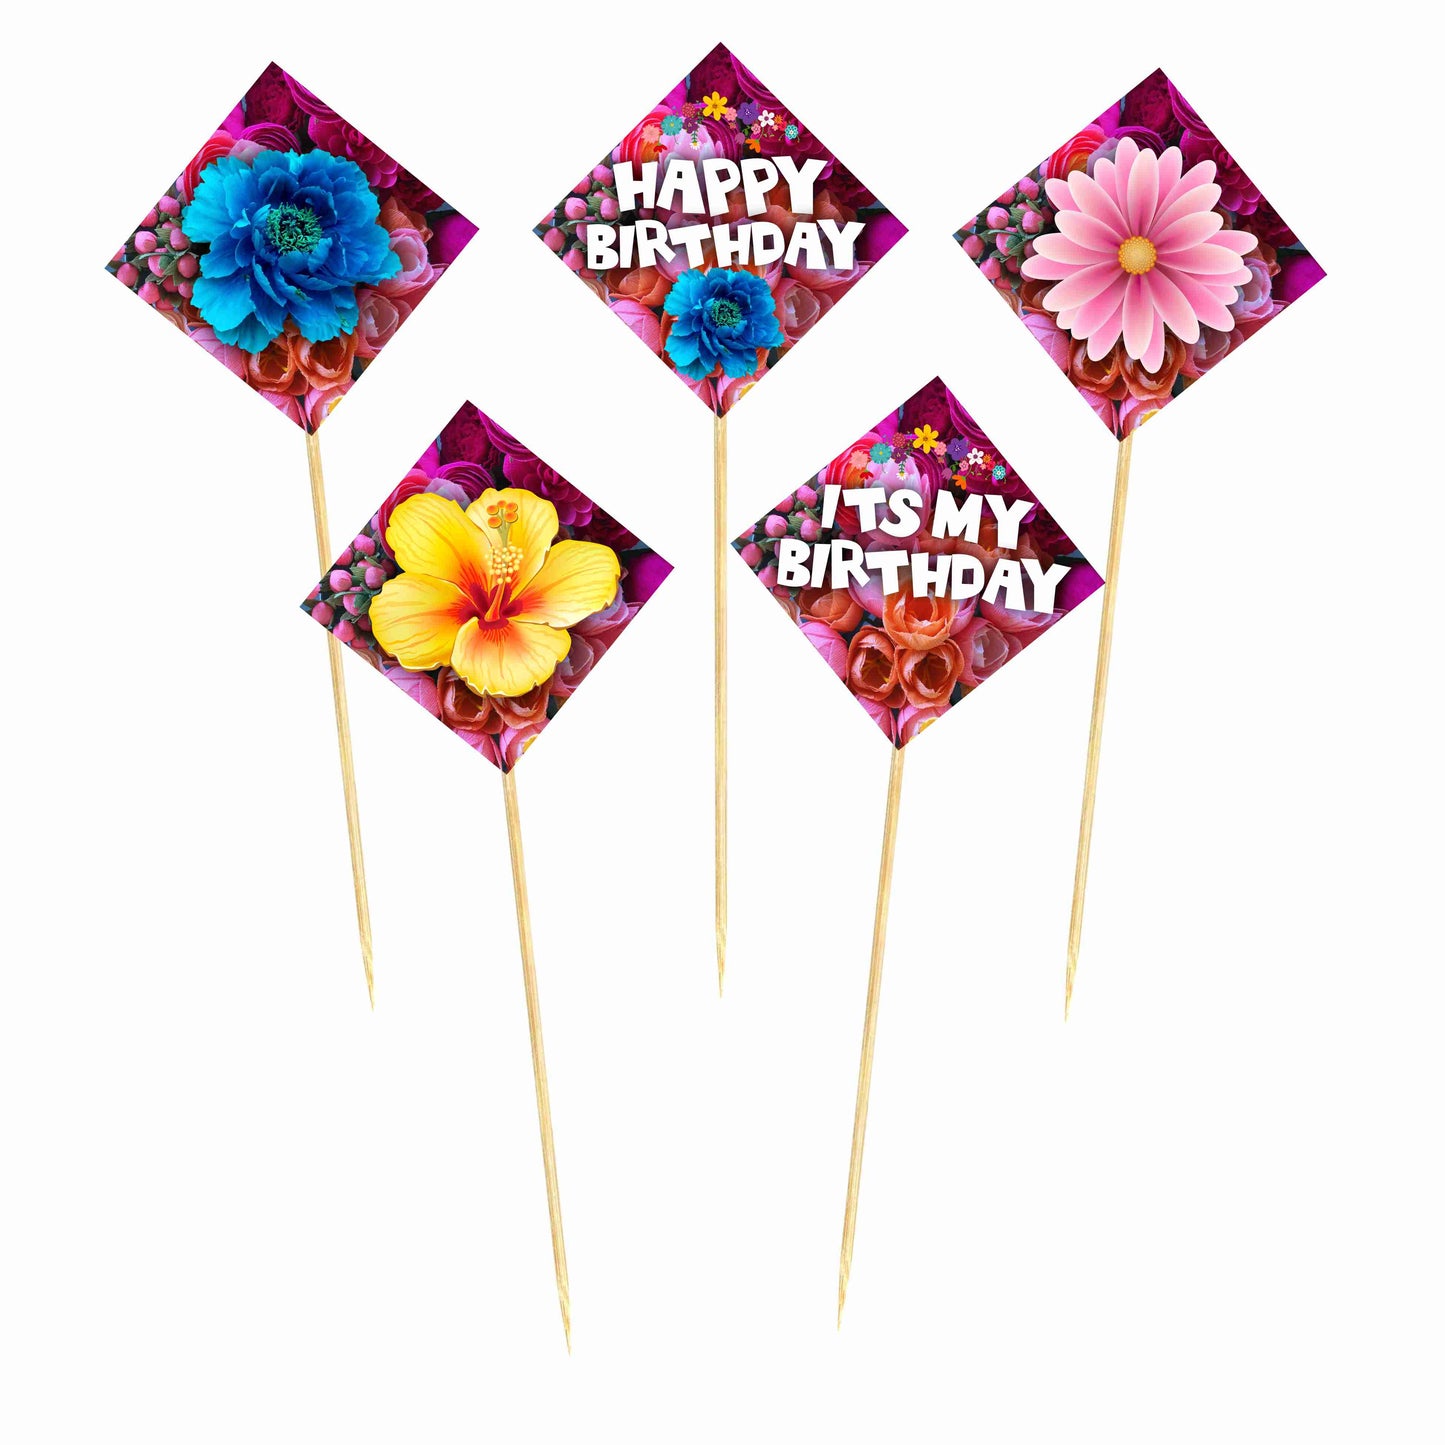 Floral Flowers Theme Cake Topper Pack of 10 Nos for Birthday Cake Decoration Theme Party Item For Boys Girls Adults Birthday Theme Decor